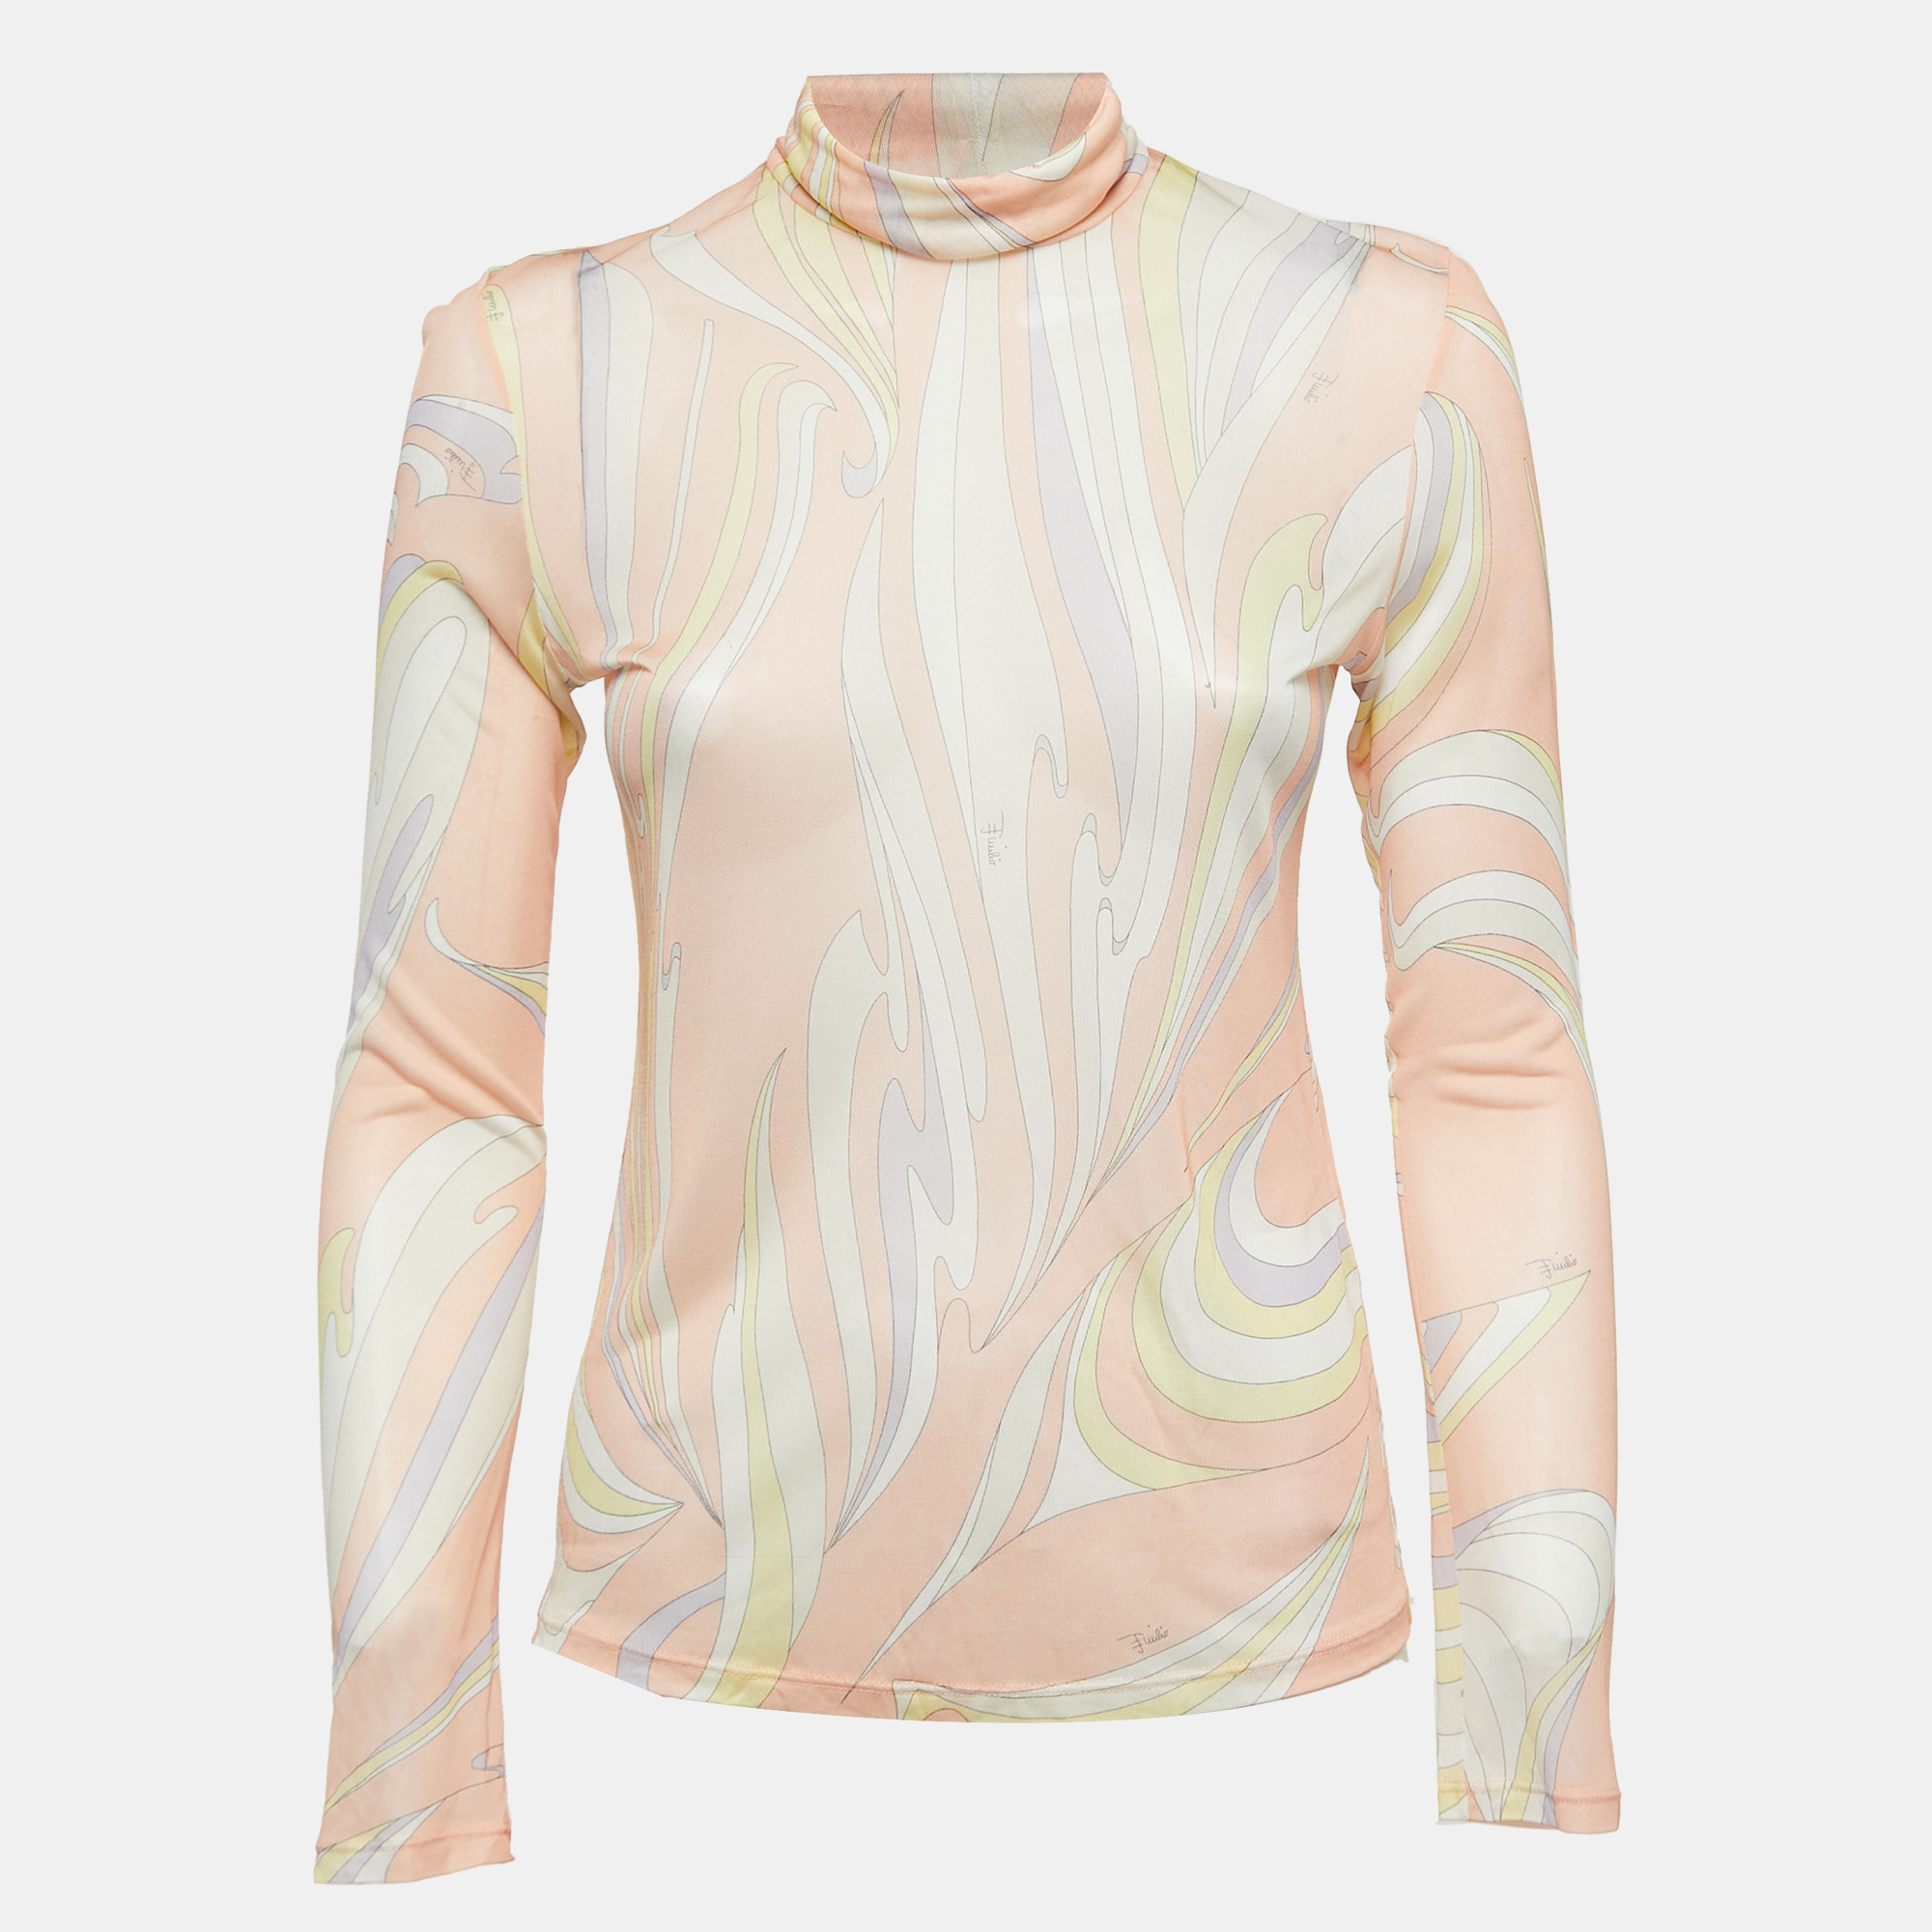 Emilio Pucci Light Pink Abstract Print Jersey High Neck Long Sleeve Top S